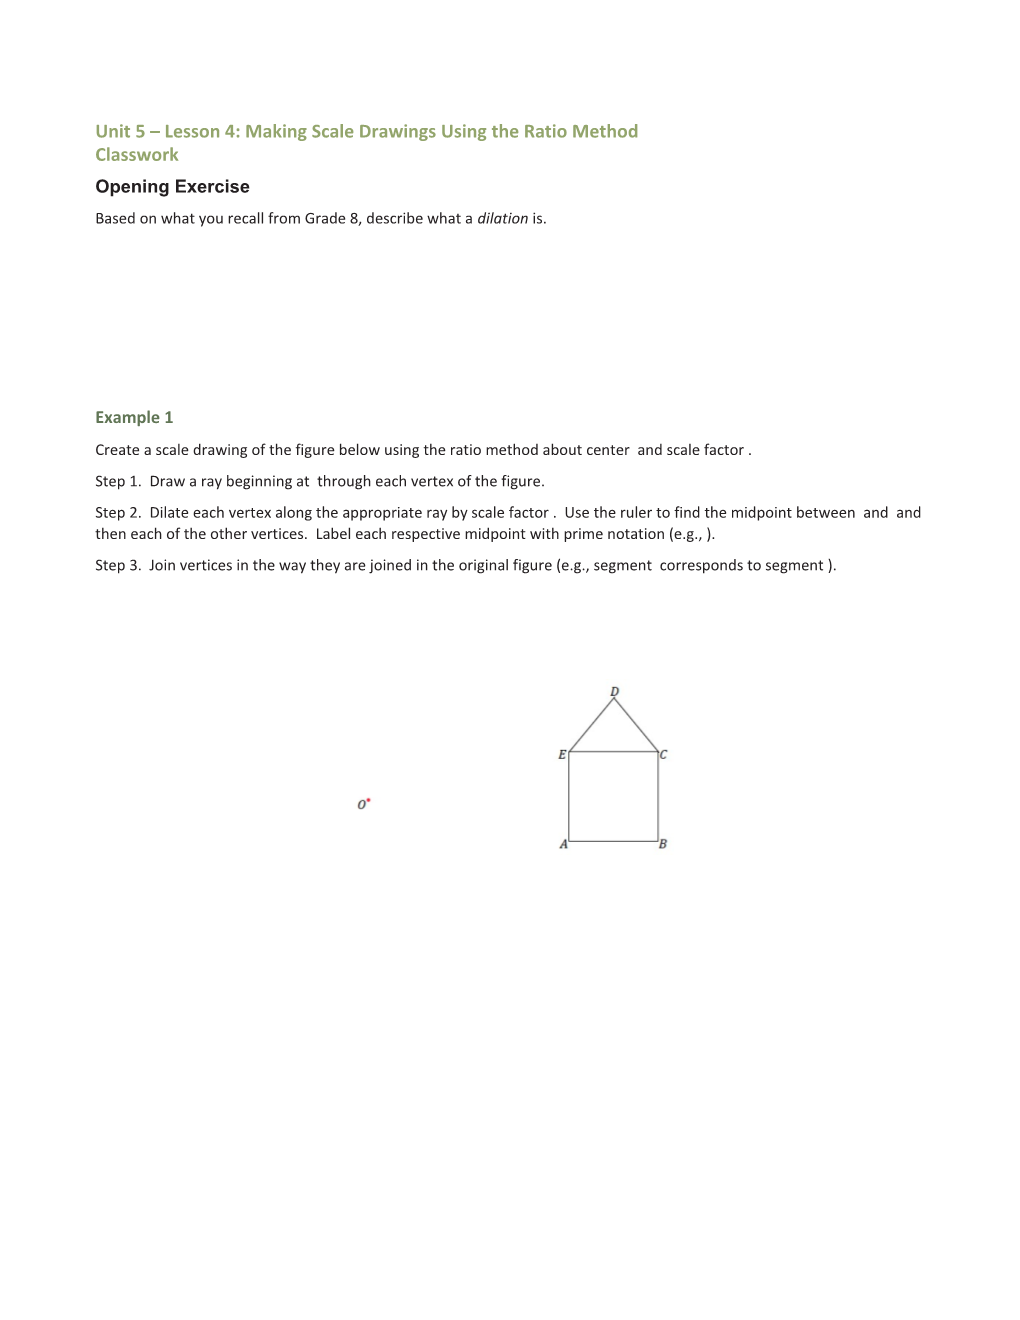 Unit 5 Lesson 4: Making Scale Drawings Using the Ratio Method